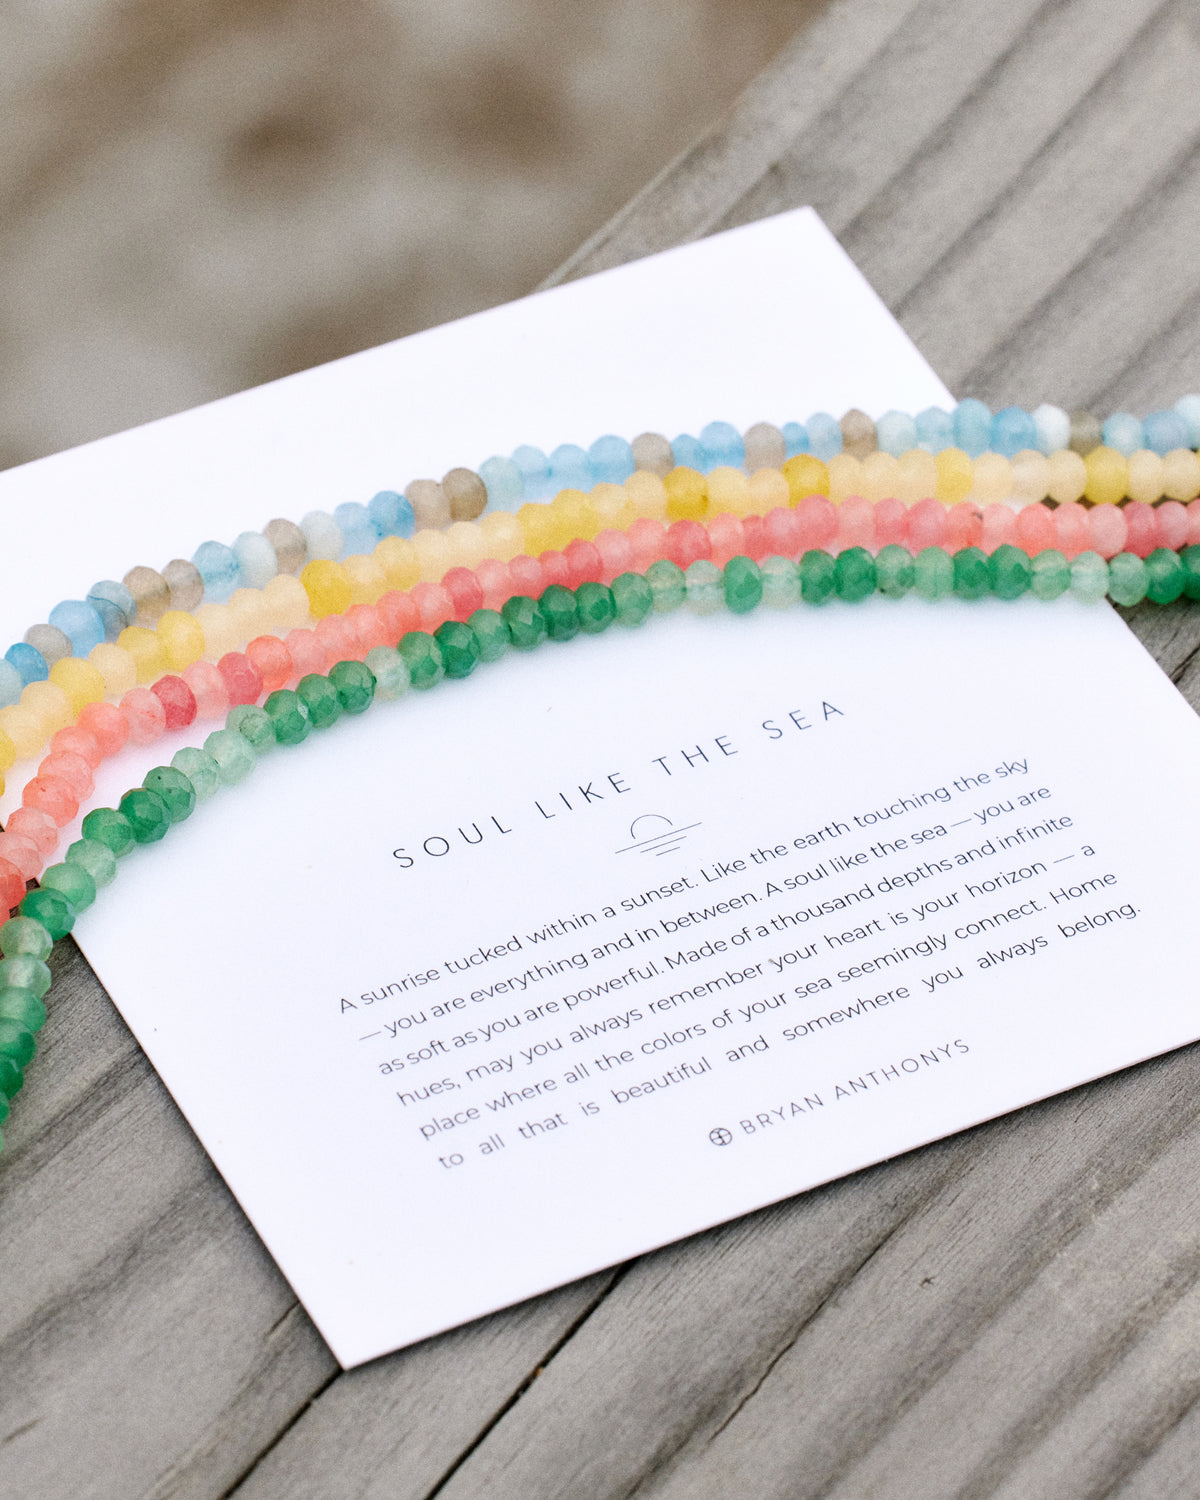 Soul Like The Sea Beaded Necklaces in 4 Colors - Blue Green Pink Yellow - with Meaning Card